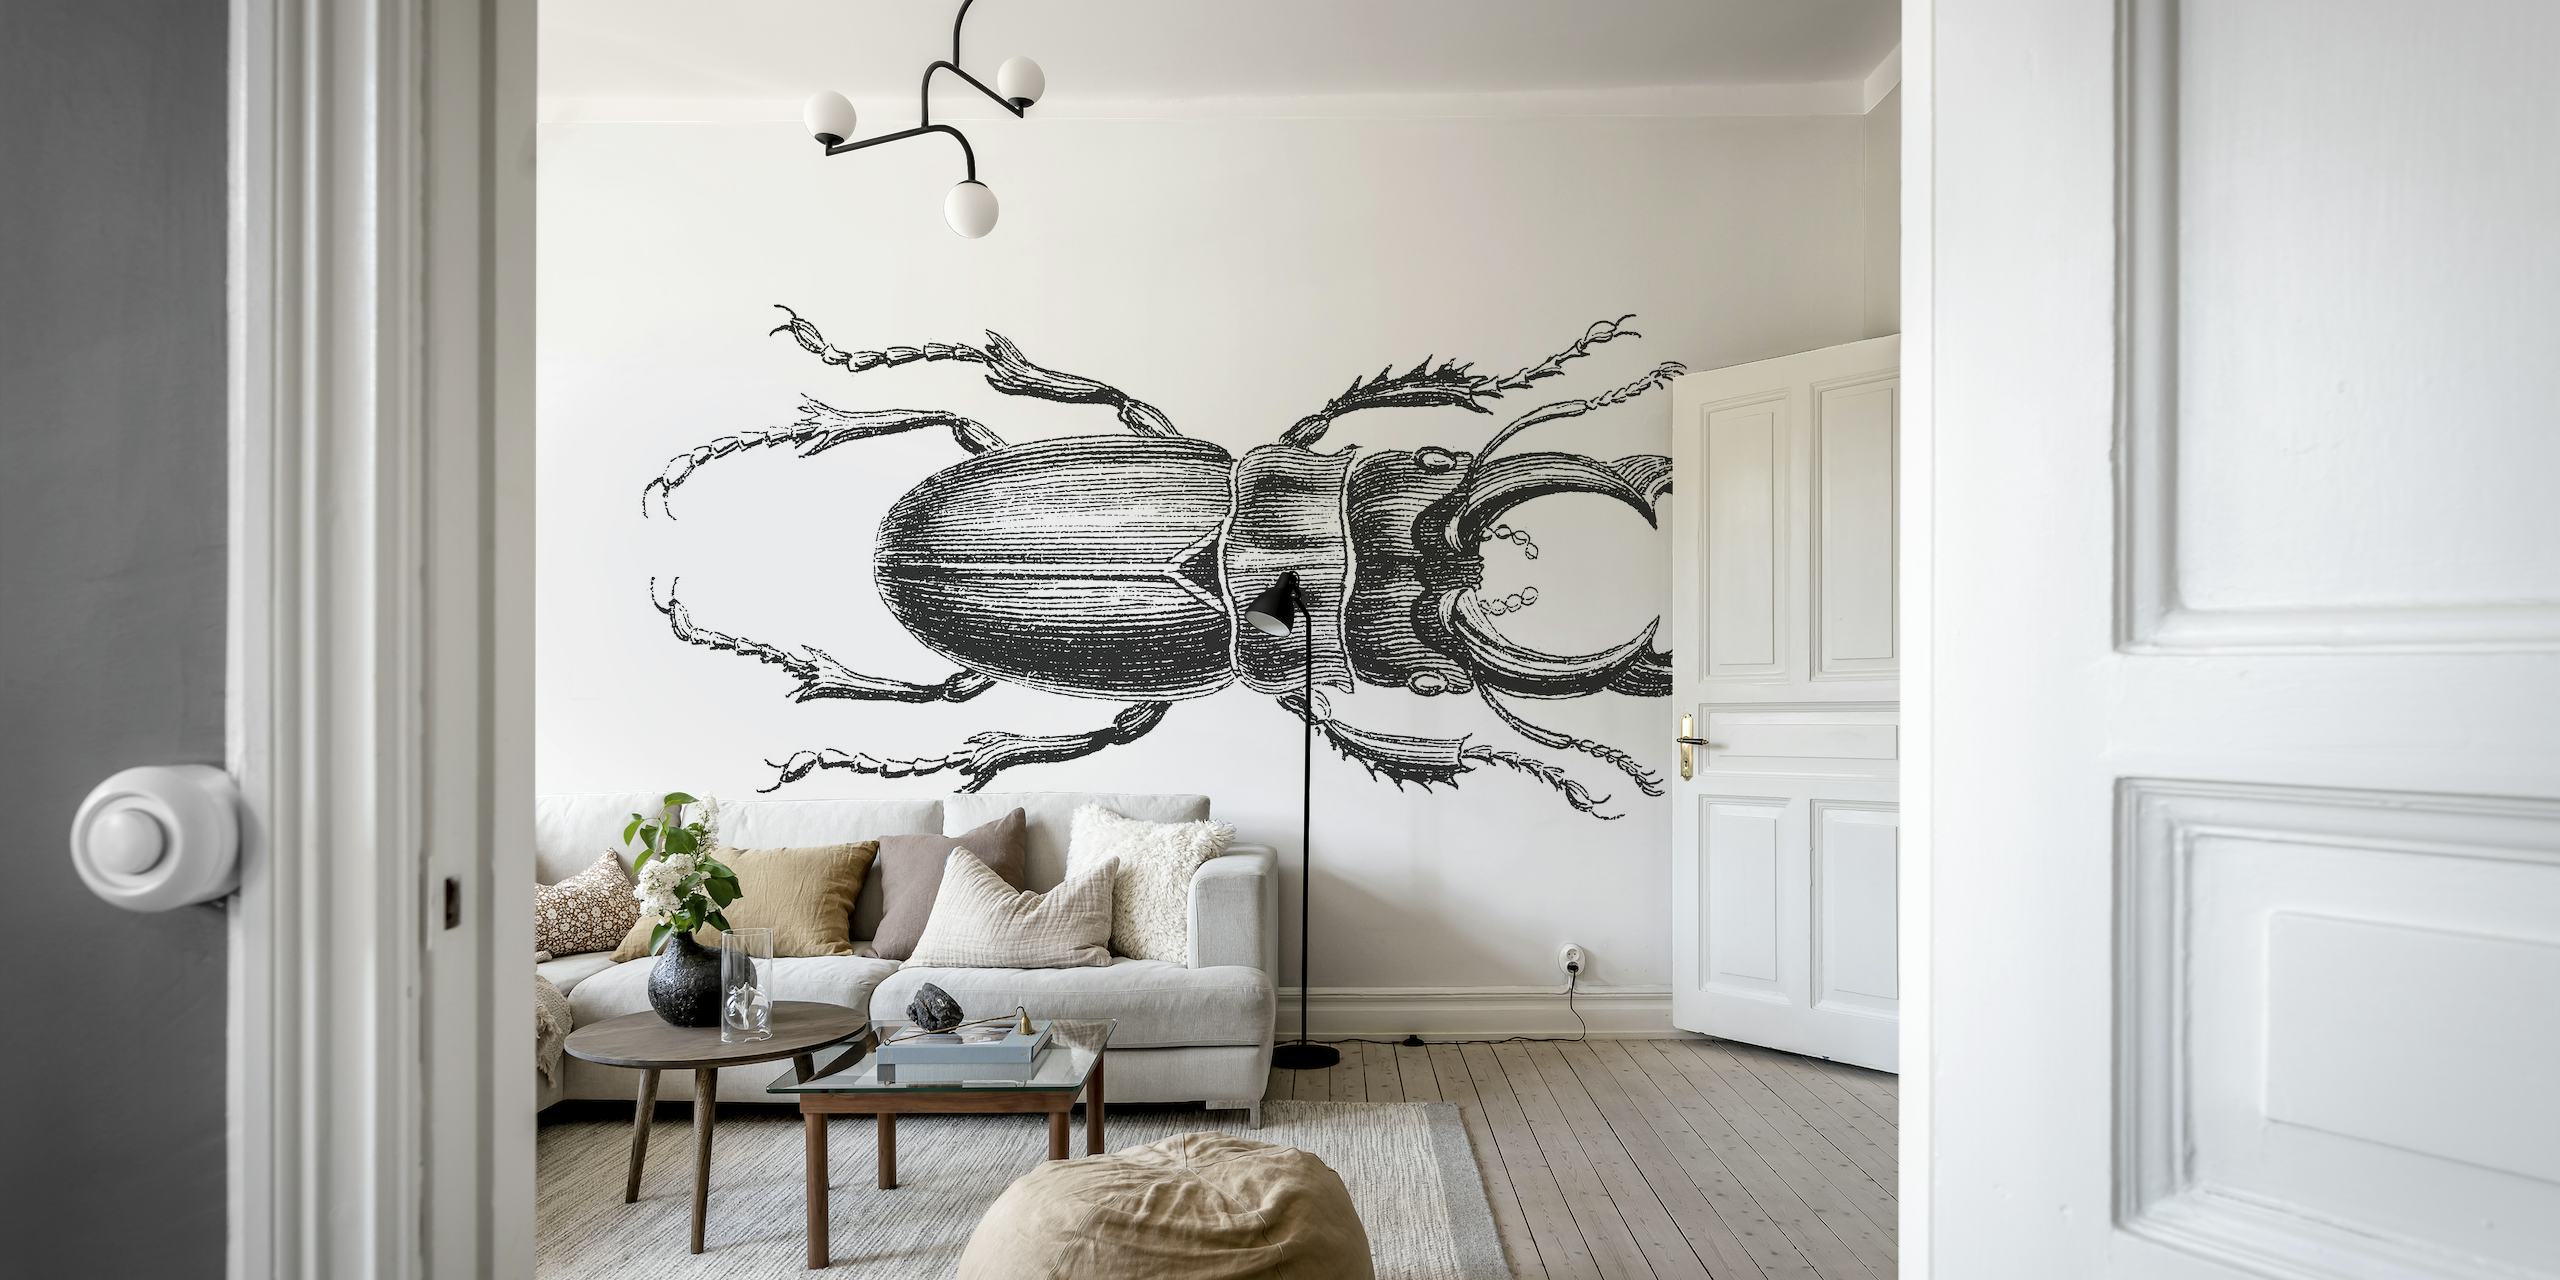 Stag Beetle Drawing wall mural in black and white sketch style